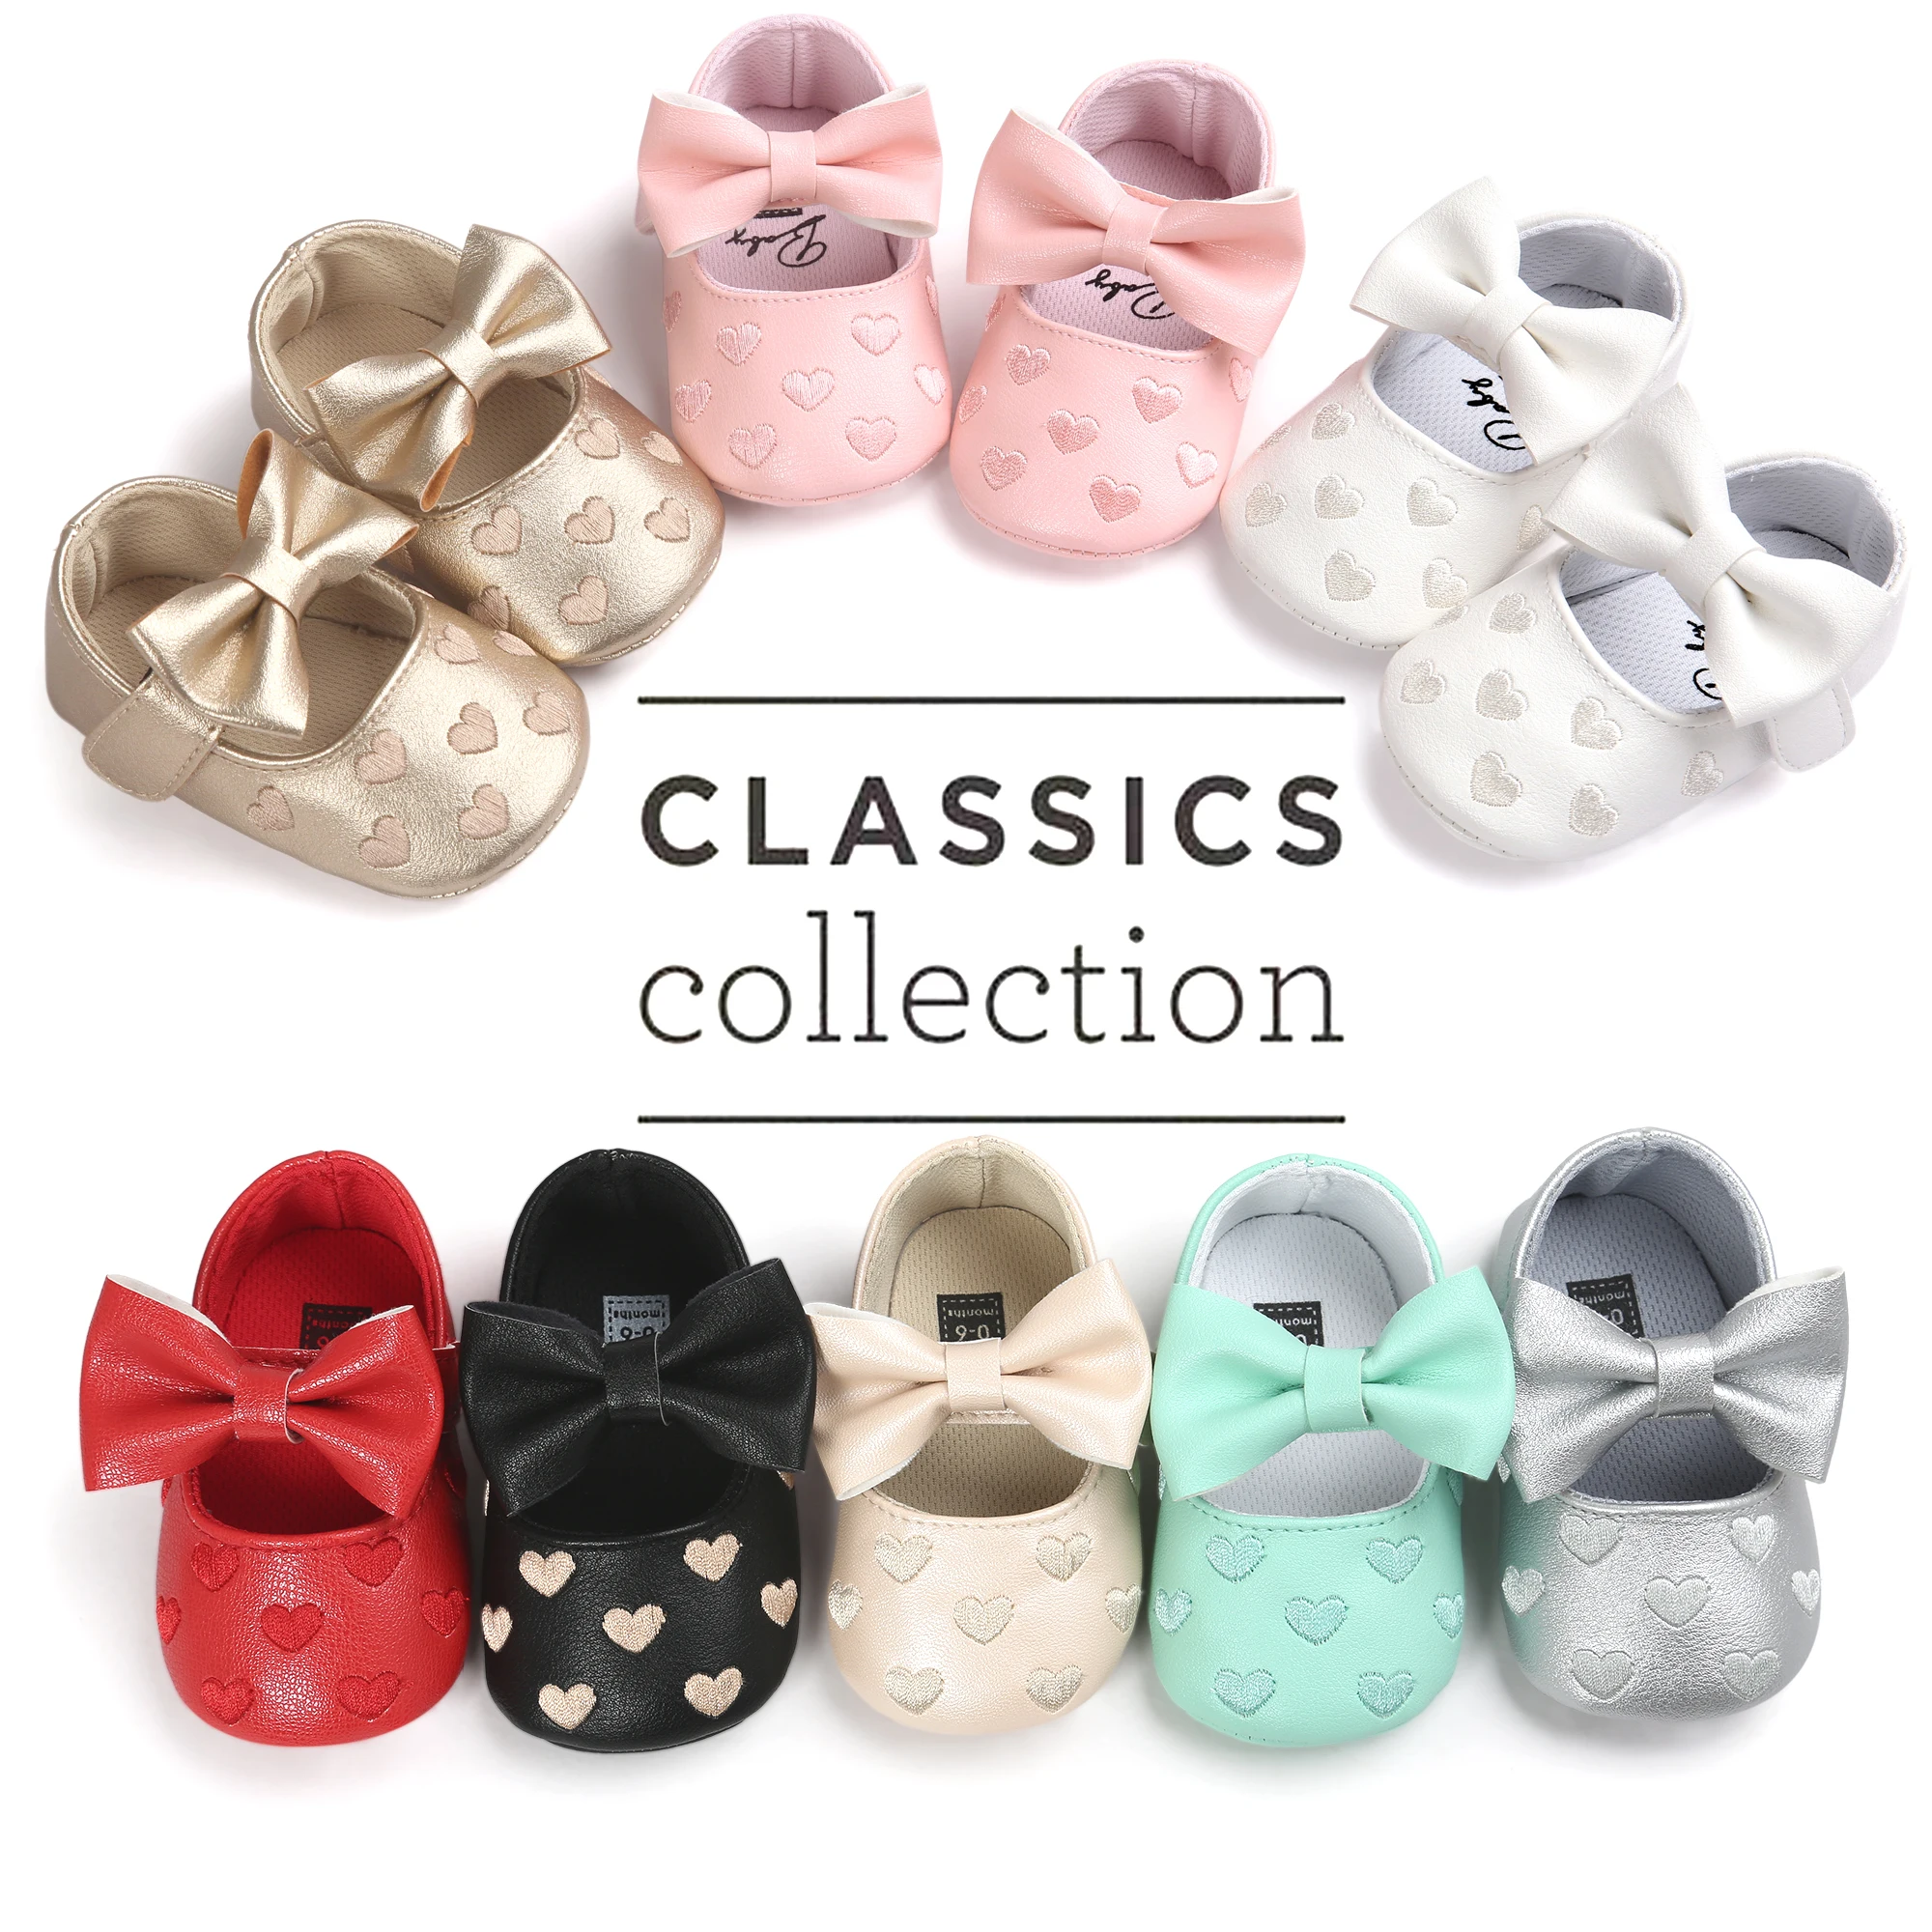 Newborn Baby Girl Shoes Bling Princess PU Leather Anti-slip Soft-sole Rubber cotton Baby First Walkers Infant Crib Shoes 0-18M images - 6